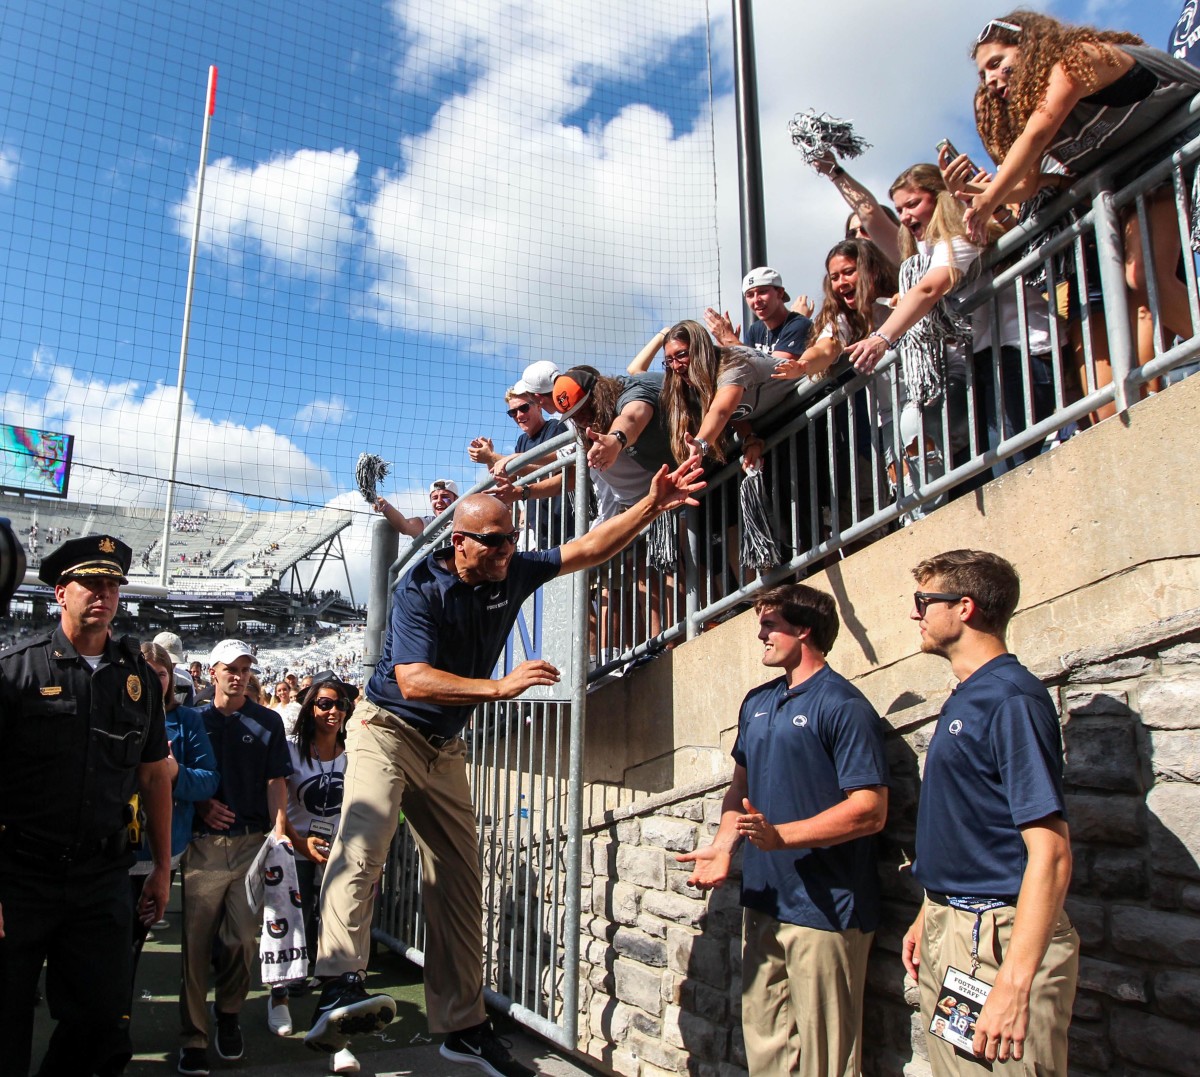 Penn State coach James Franklin celebrates with fans at Beaver Stadium.